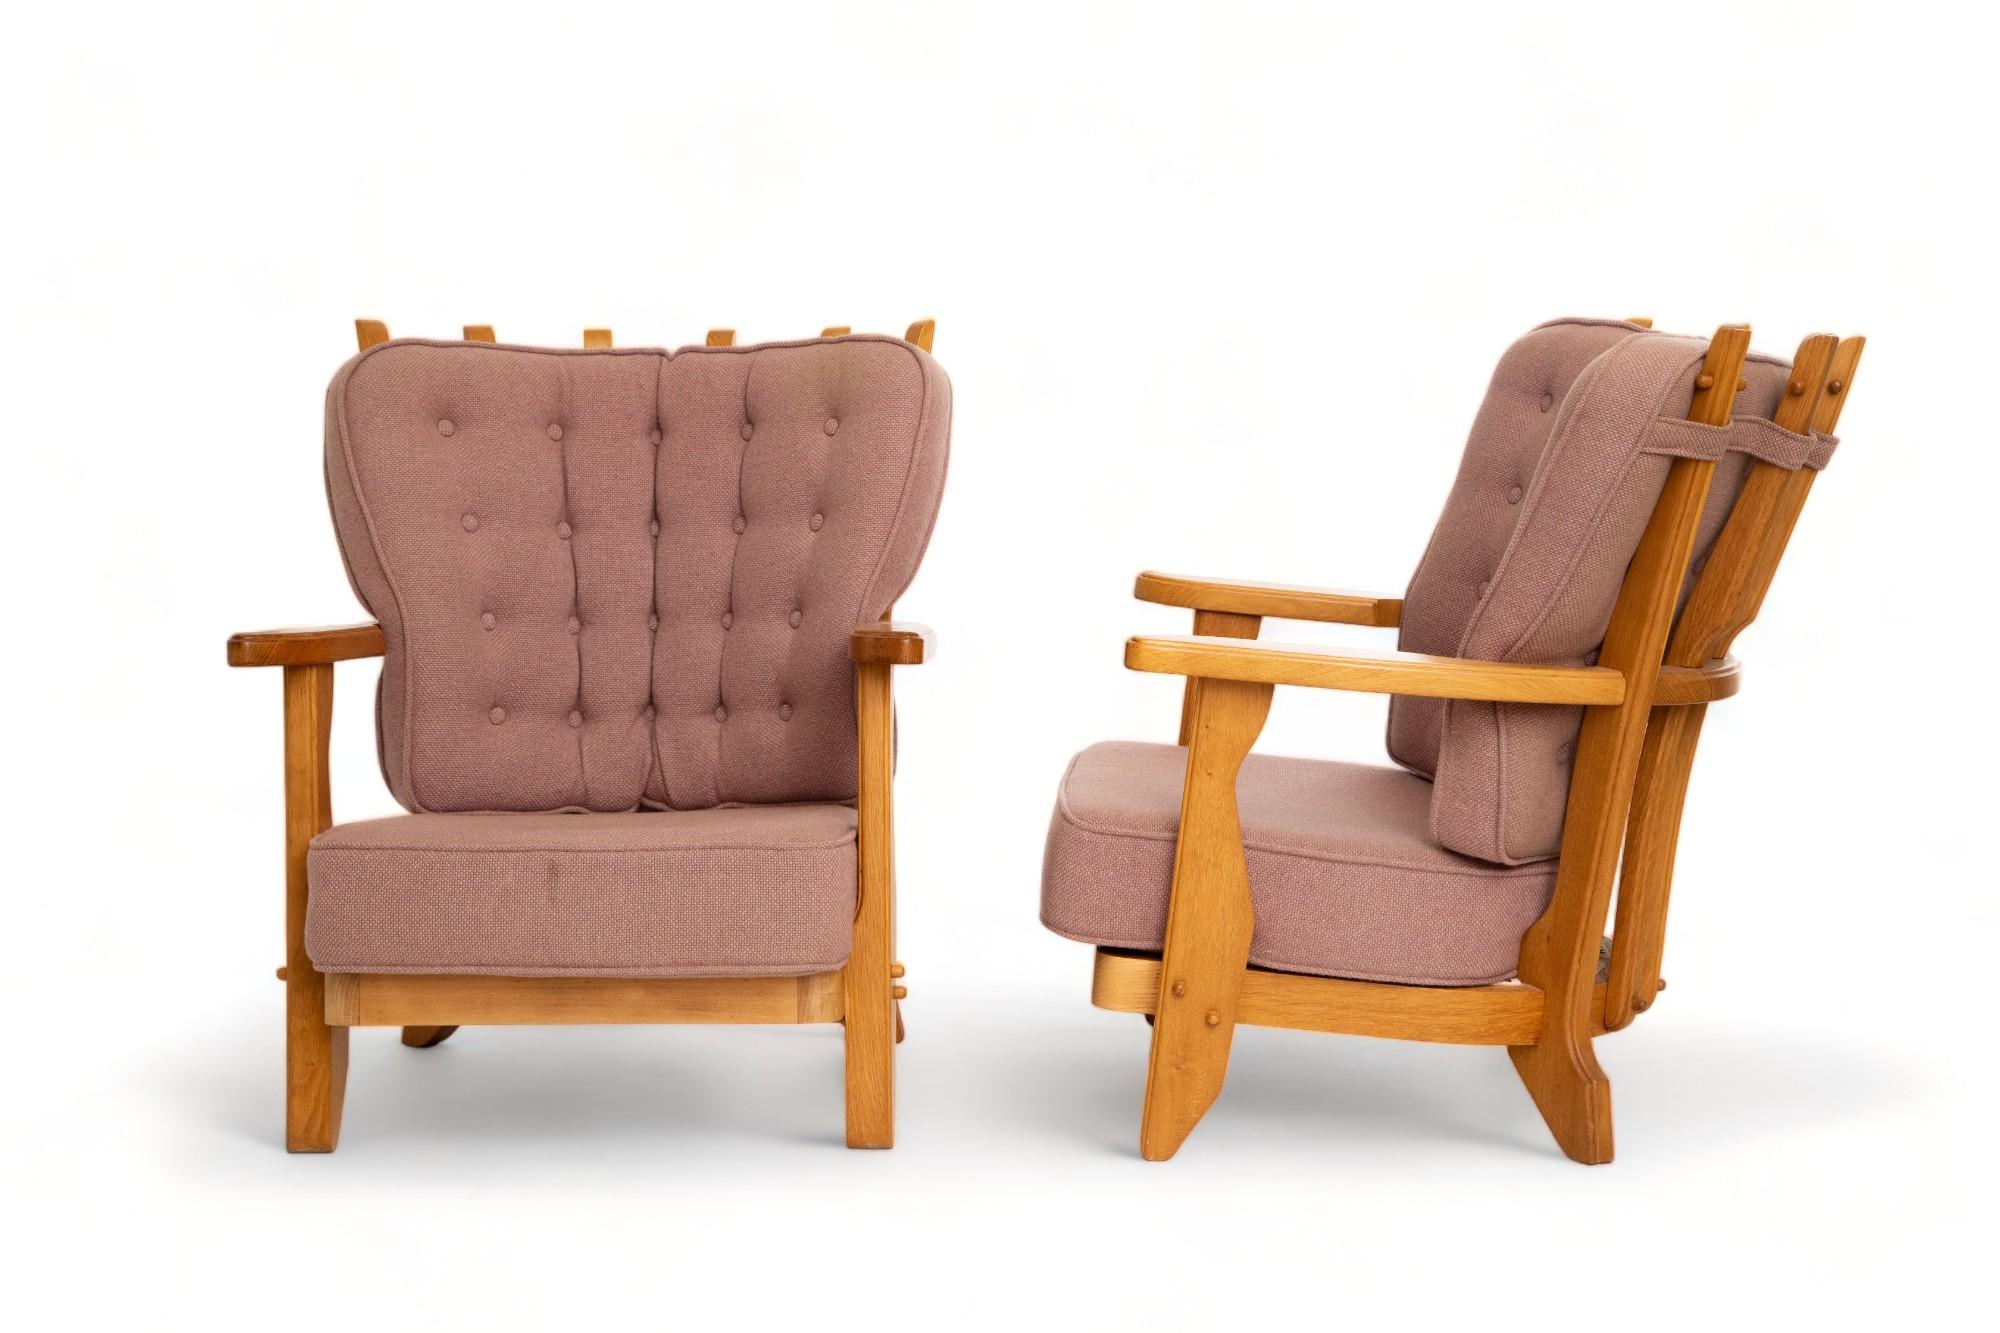 Pair of French Mid-Century Modern Oak Lounge Chairs by Guillerme et Chambron In Excellent Condition For Sale In Miami, FL